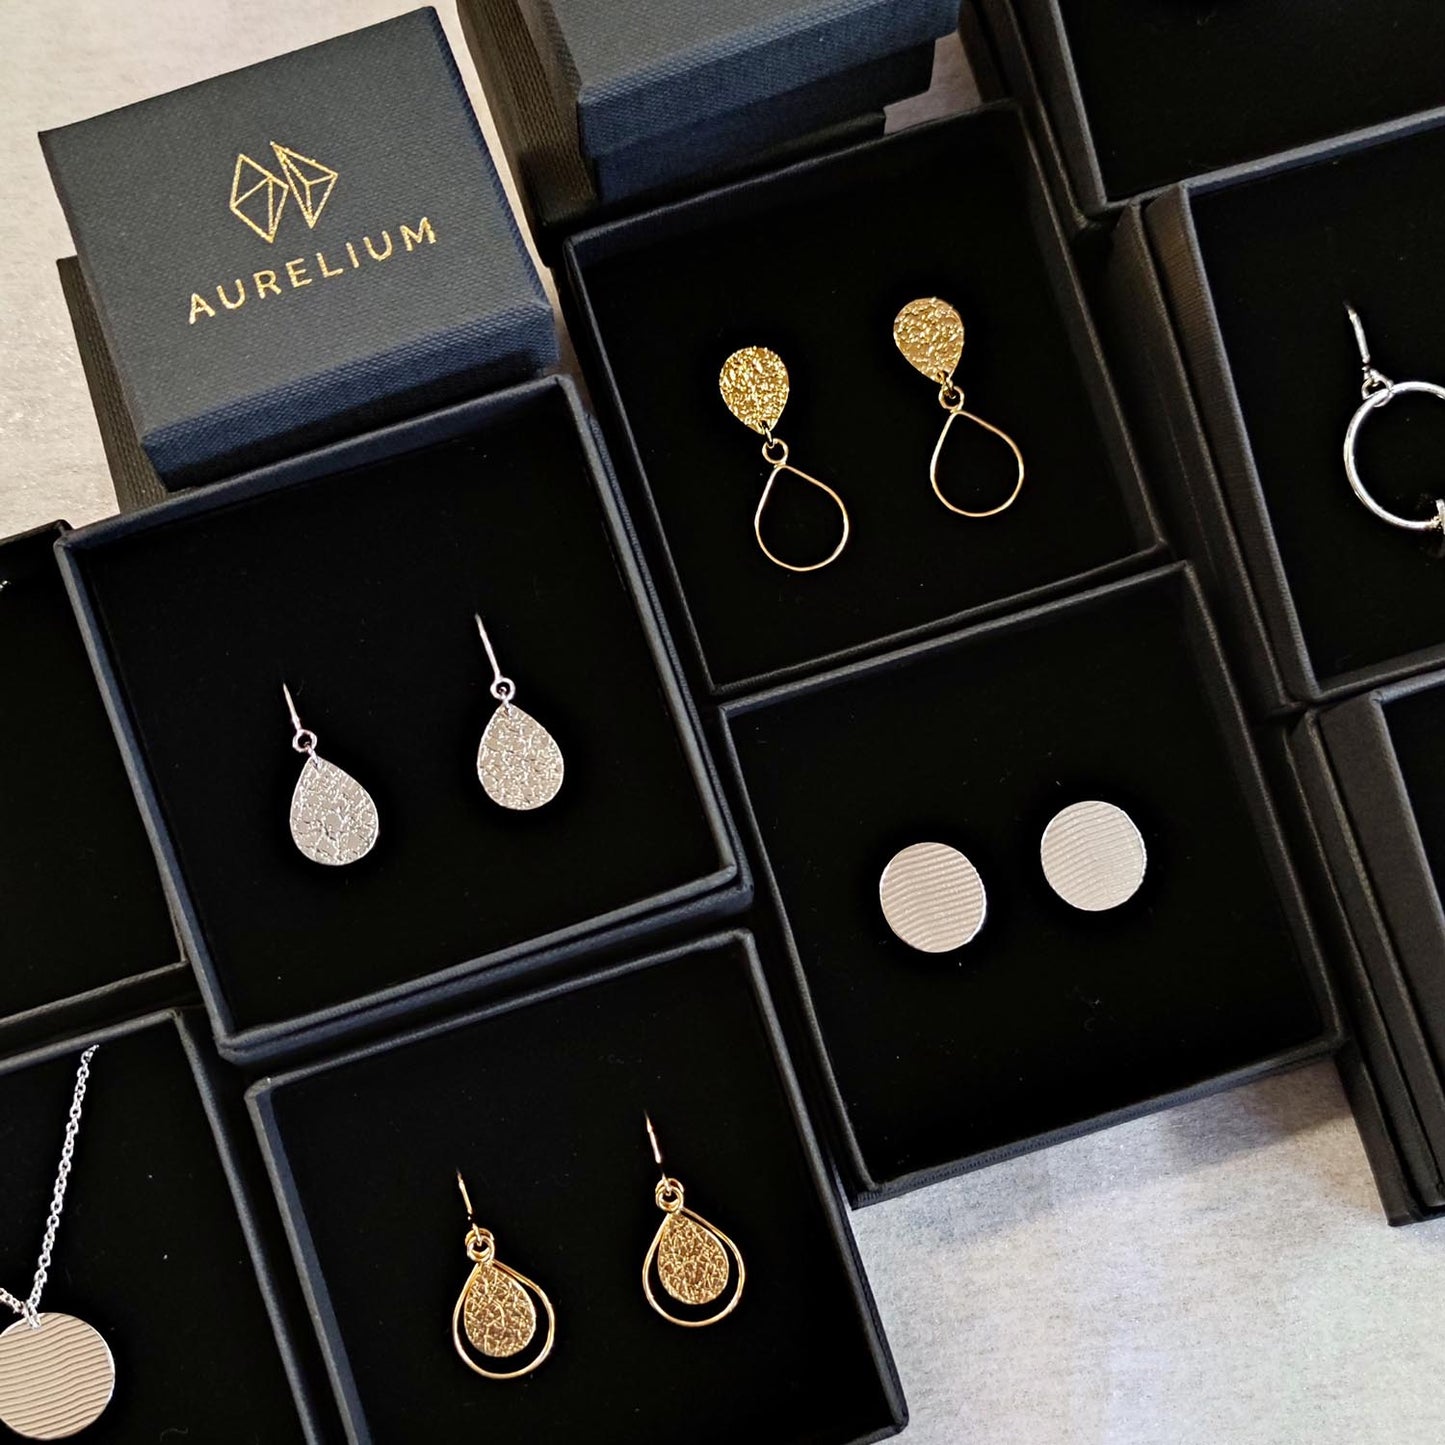 aurelium gold and silver jewellery in black gift boxes